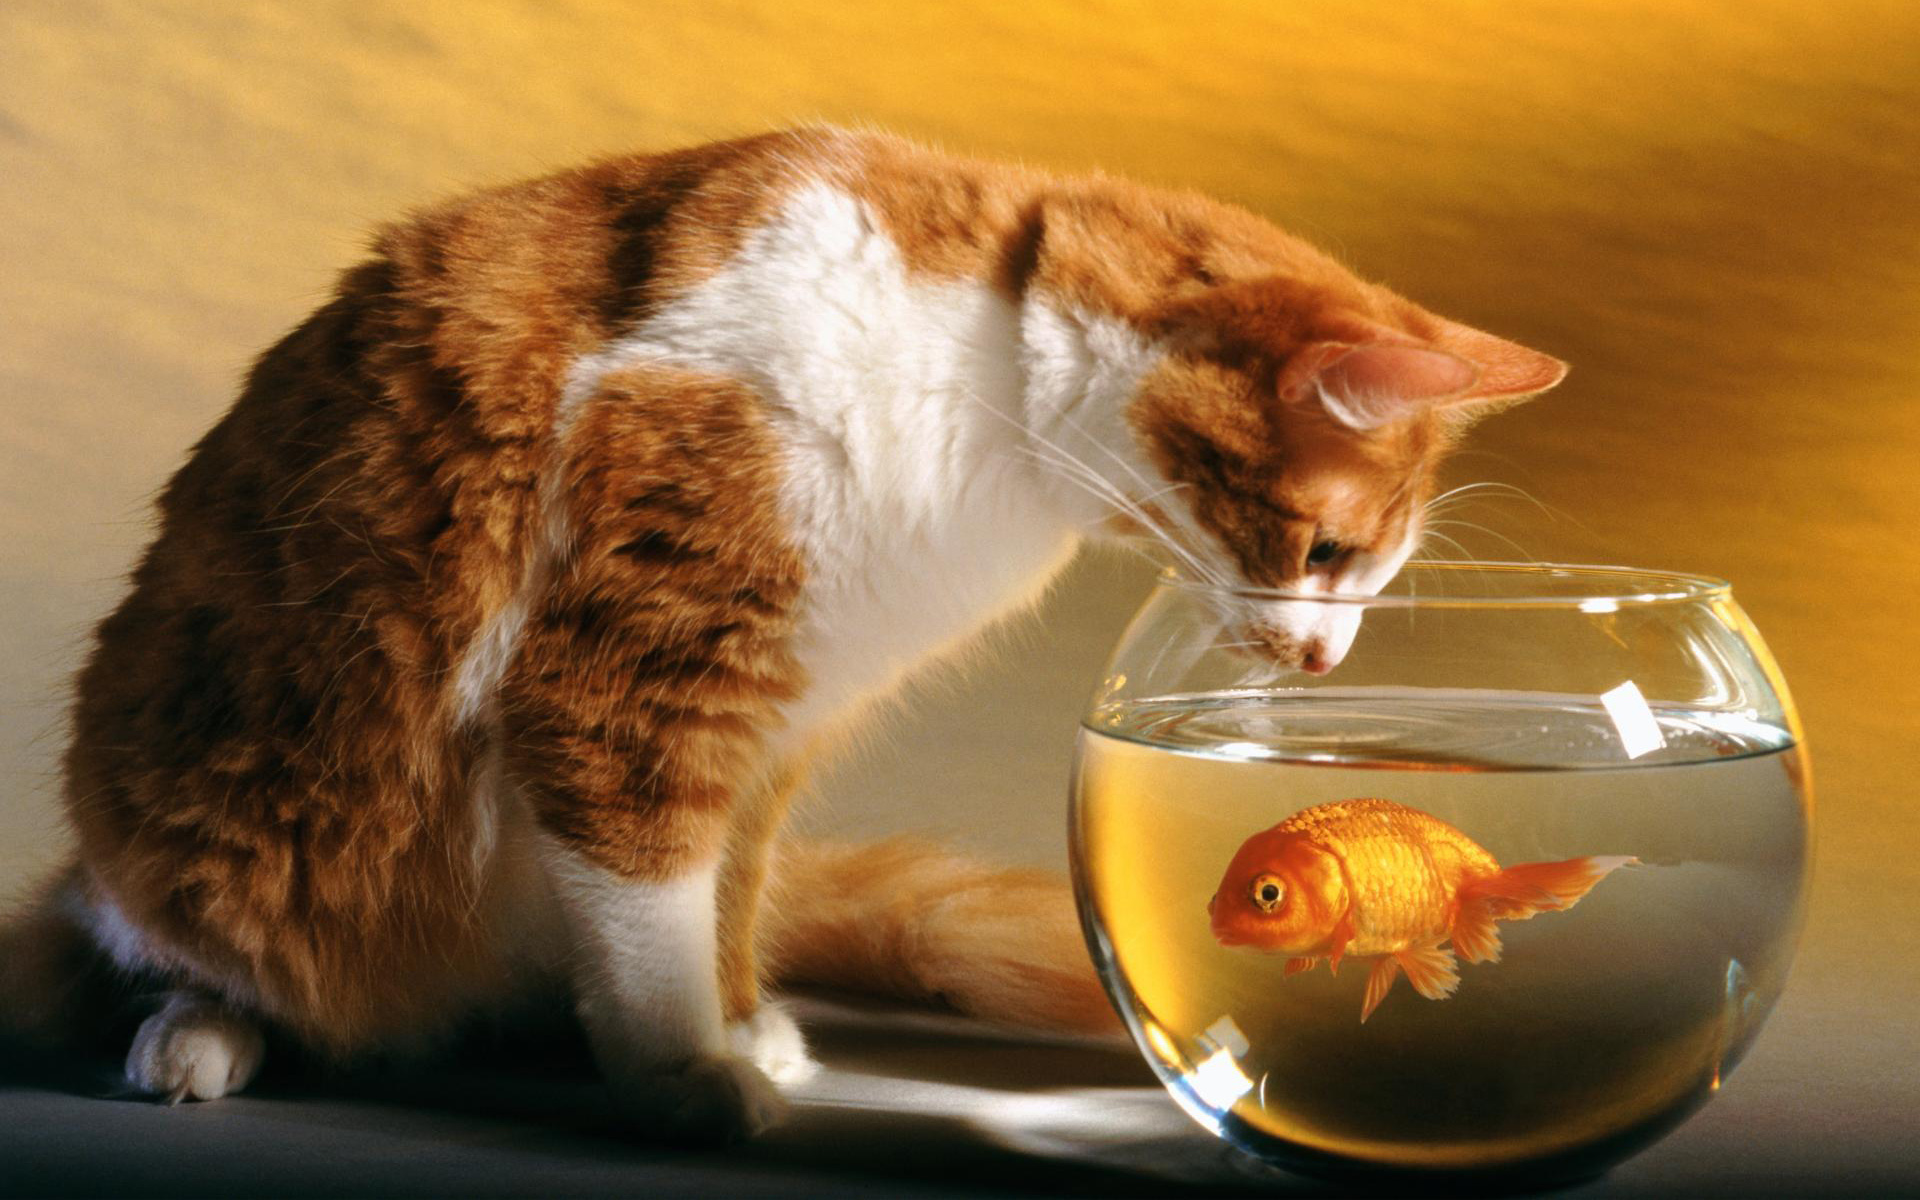 Cat curiously peering into a fish-filled bowl